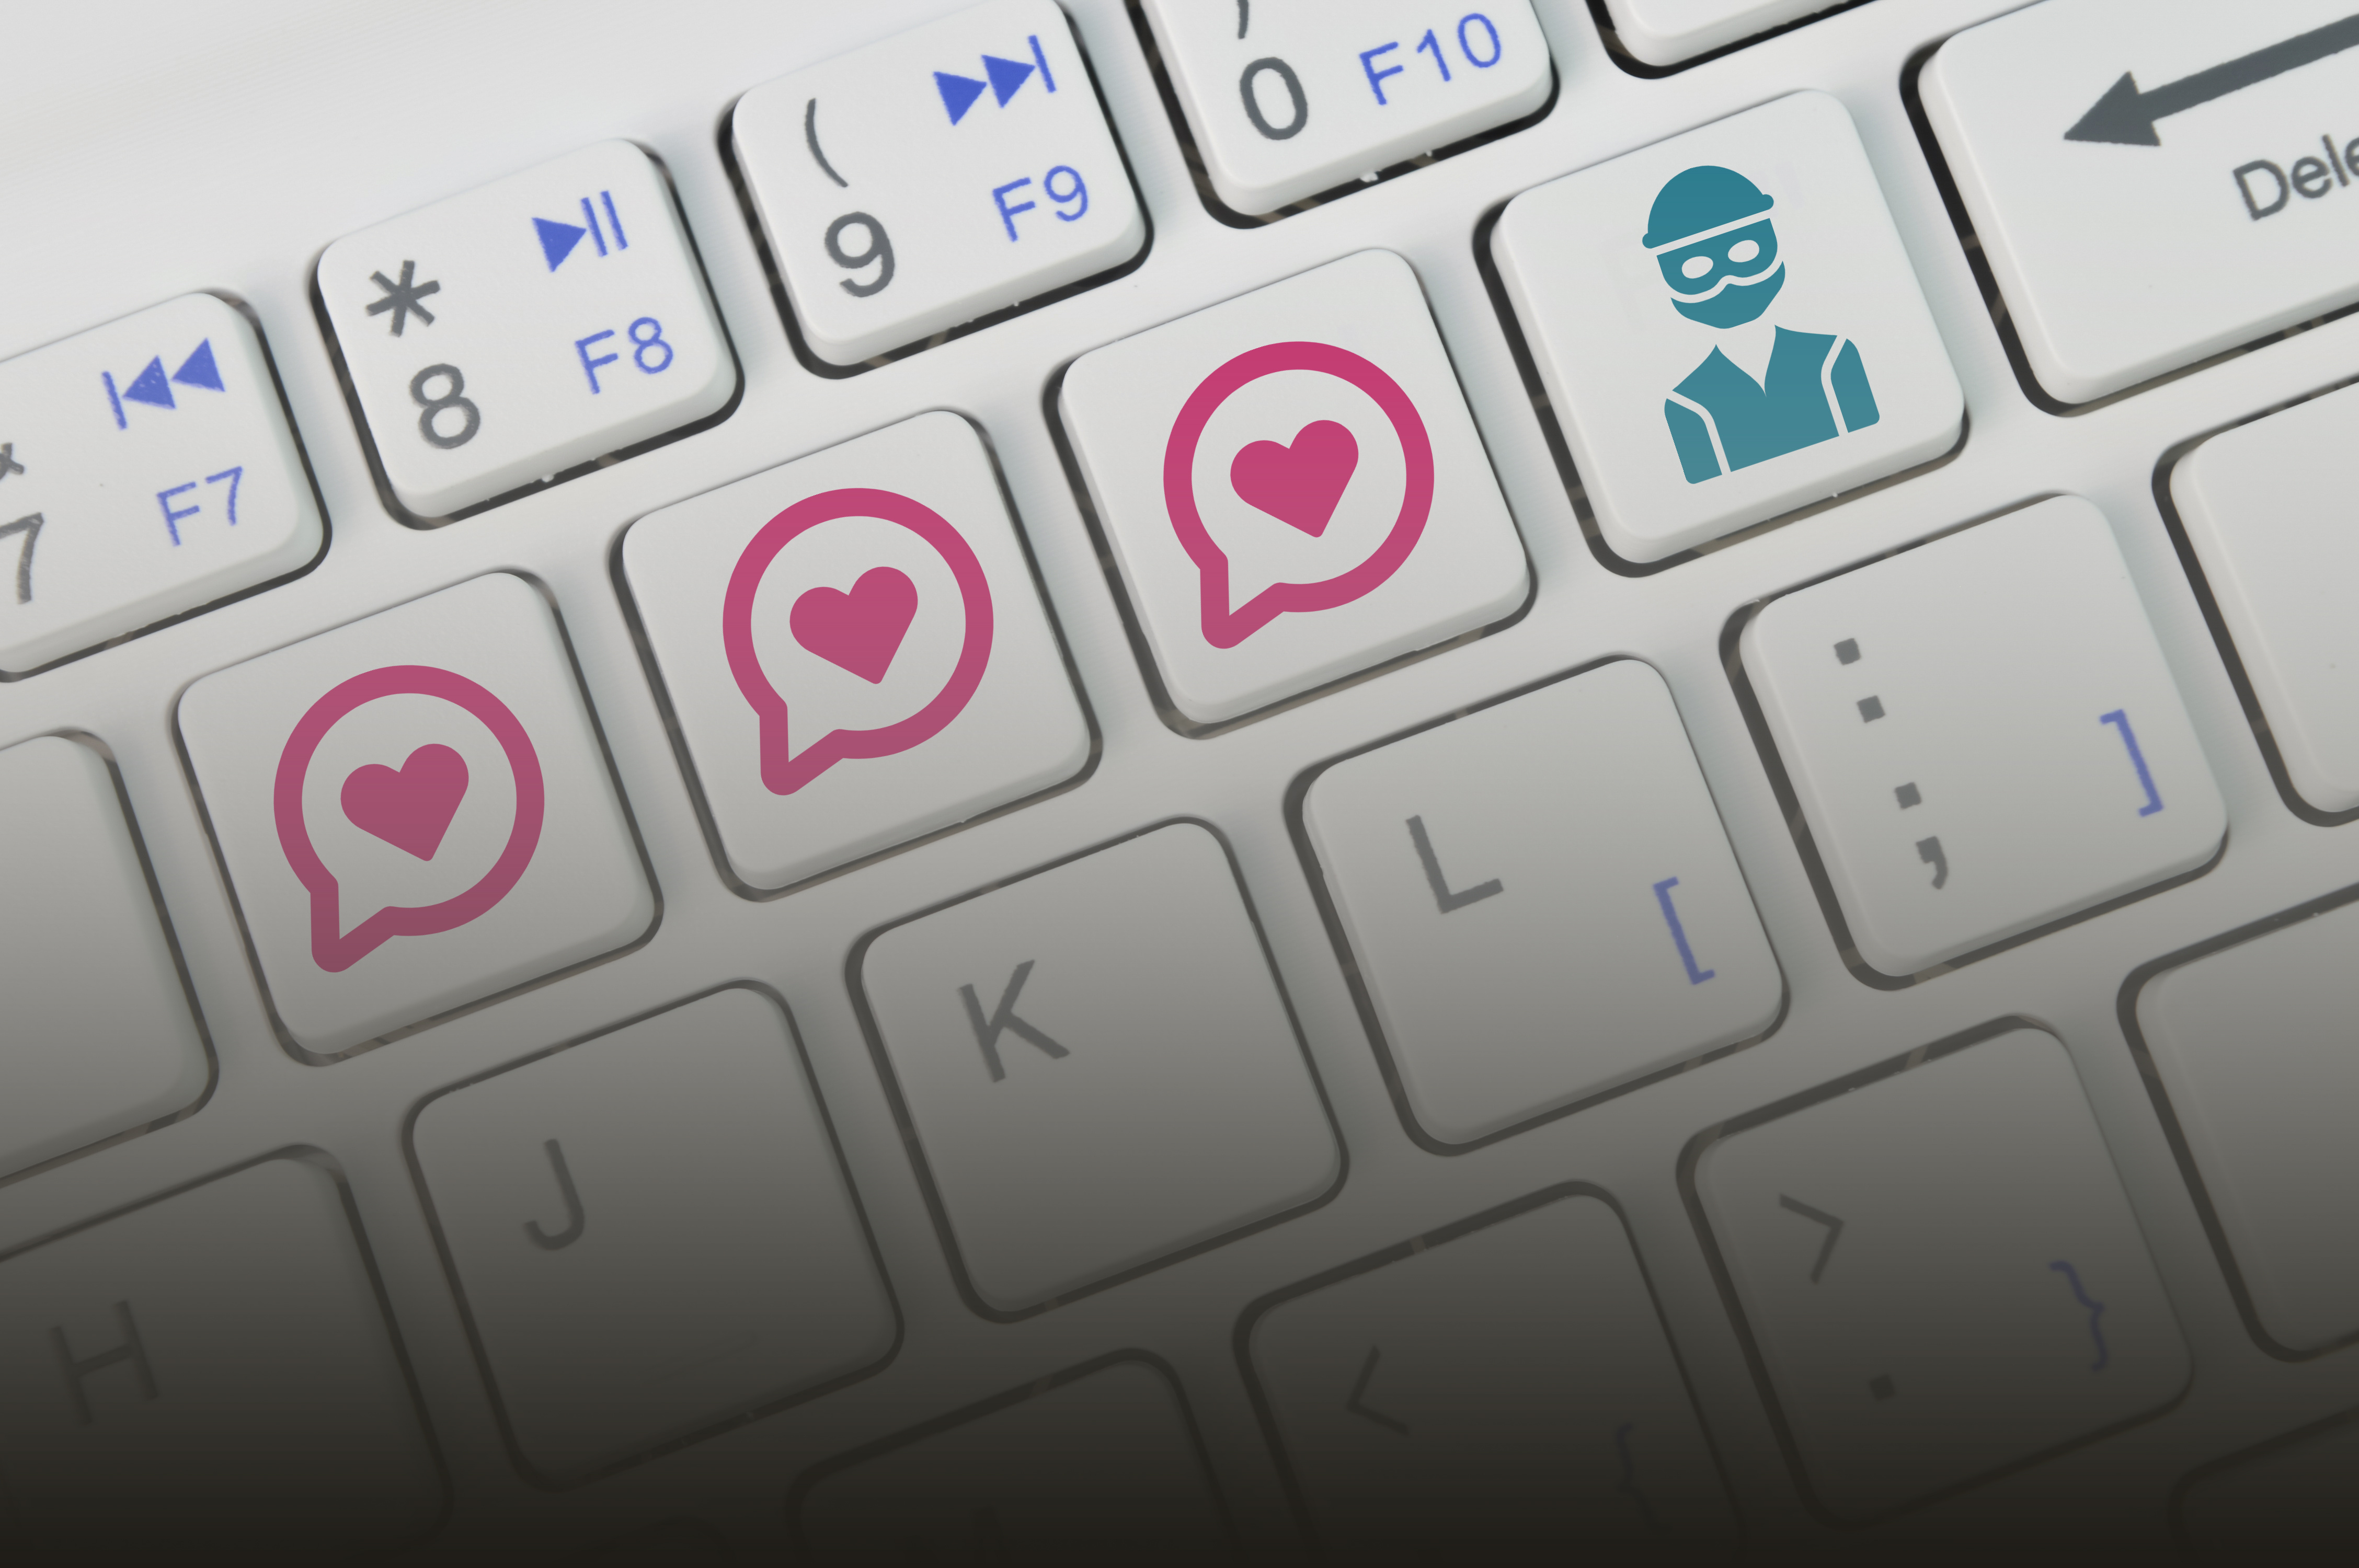 An image showing a computer keyboard. As well as heart icon keys, the keyboard features a key with an image representing a thief.